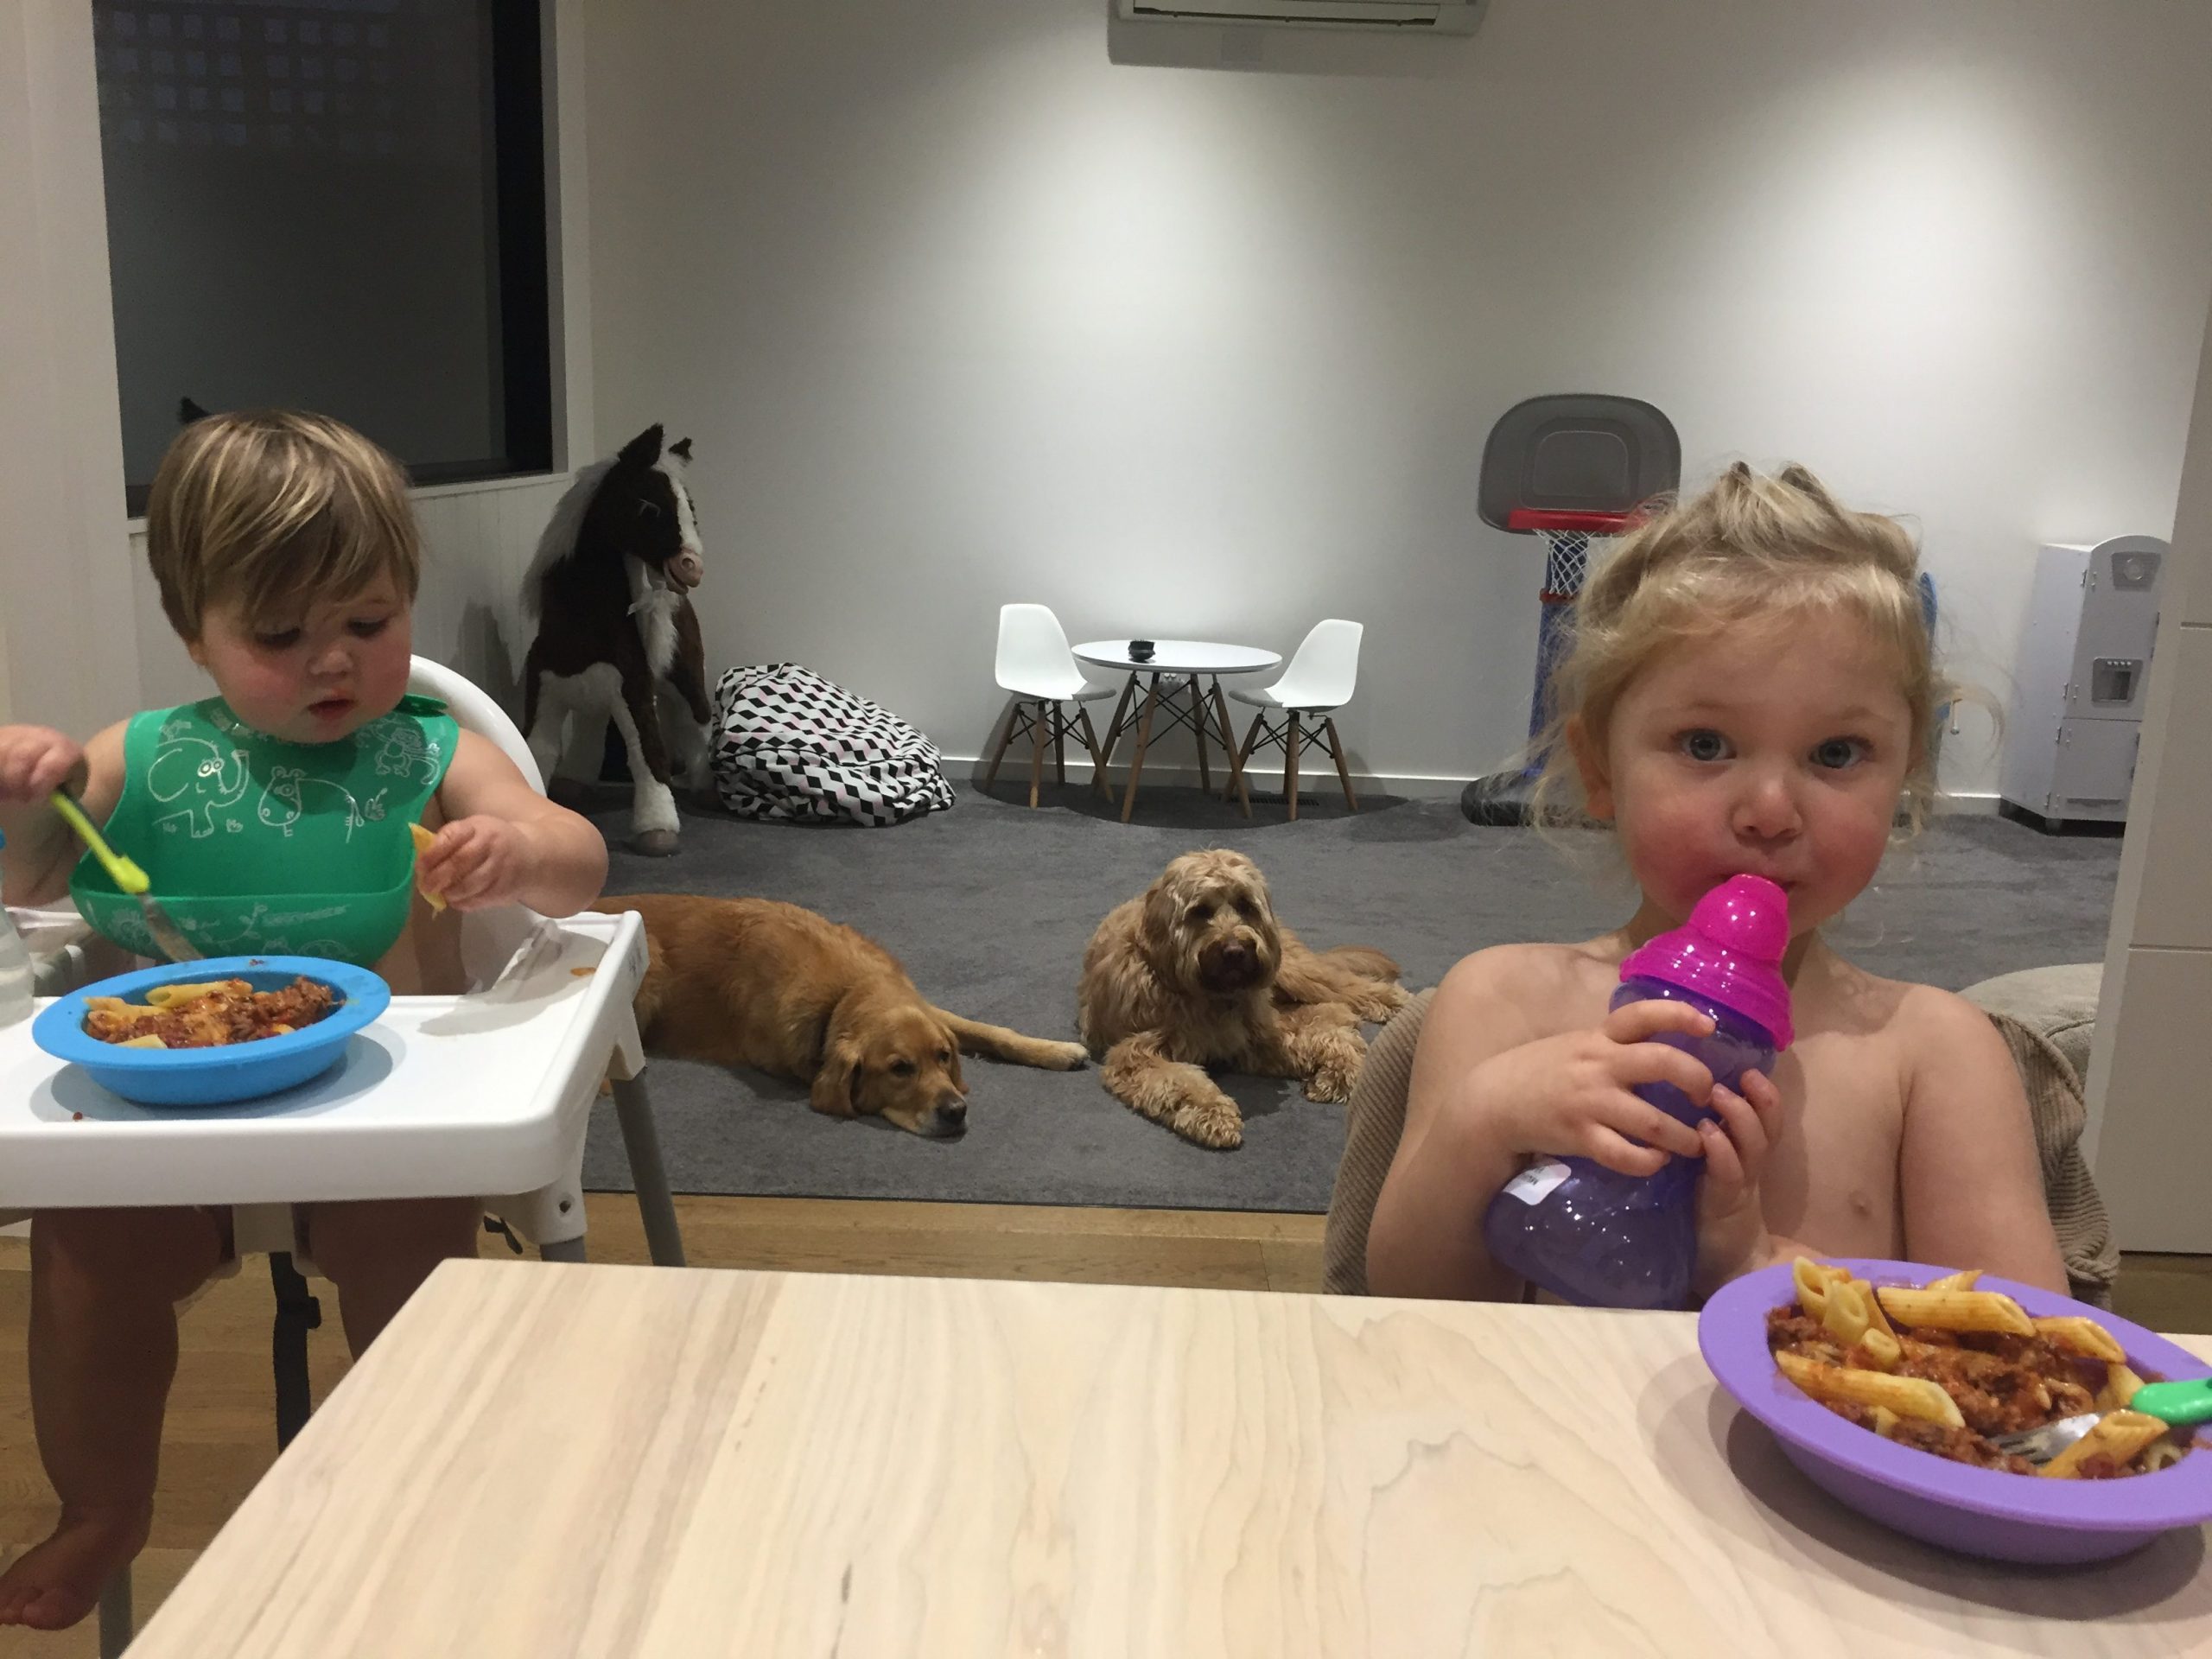 Managing feeding time with your kids and dog